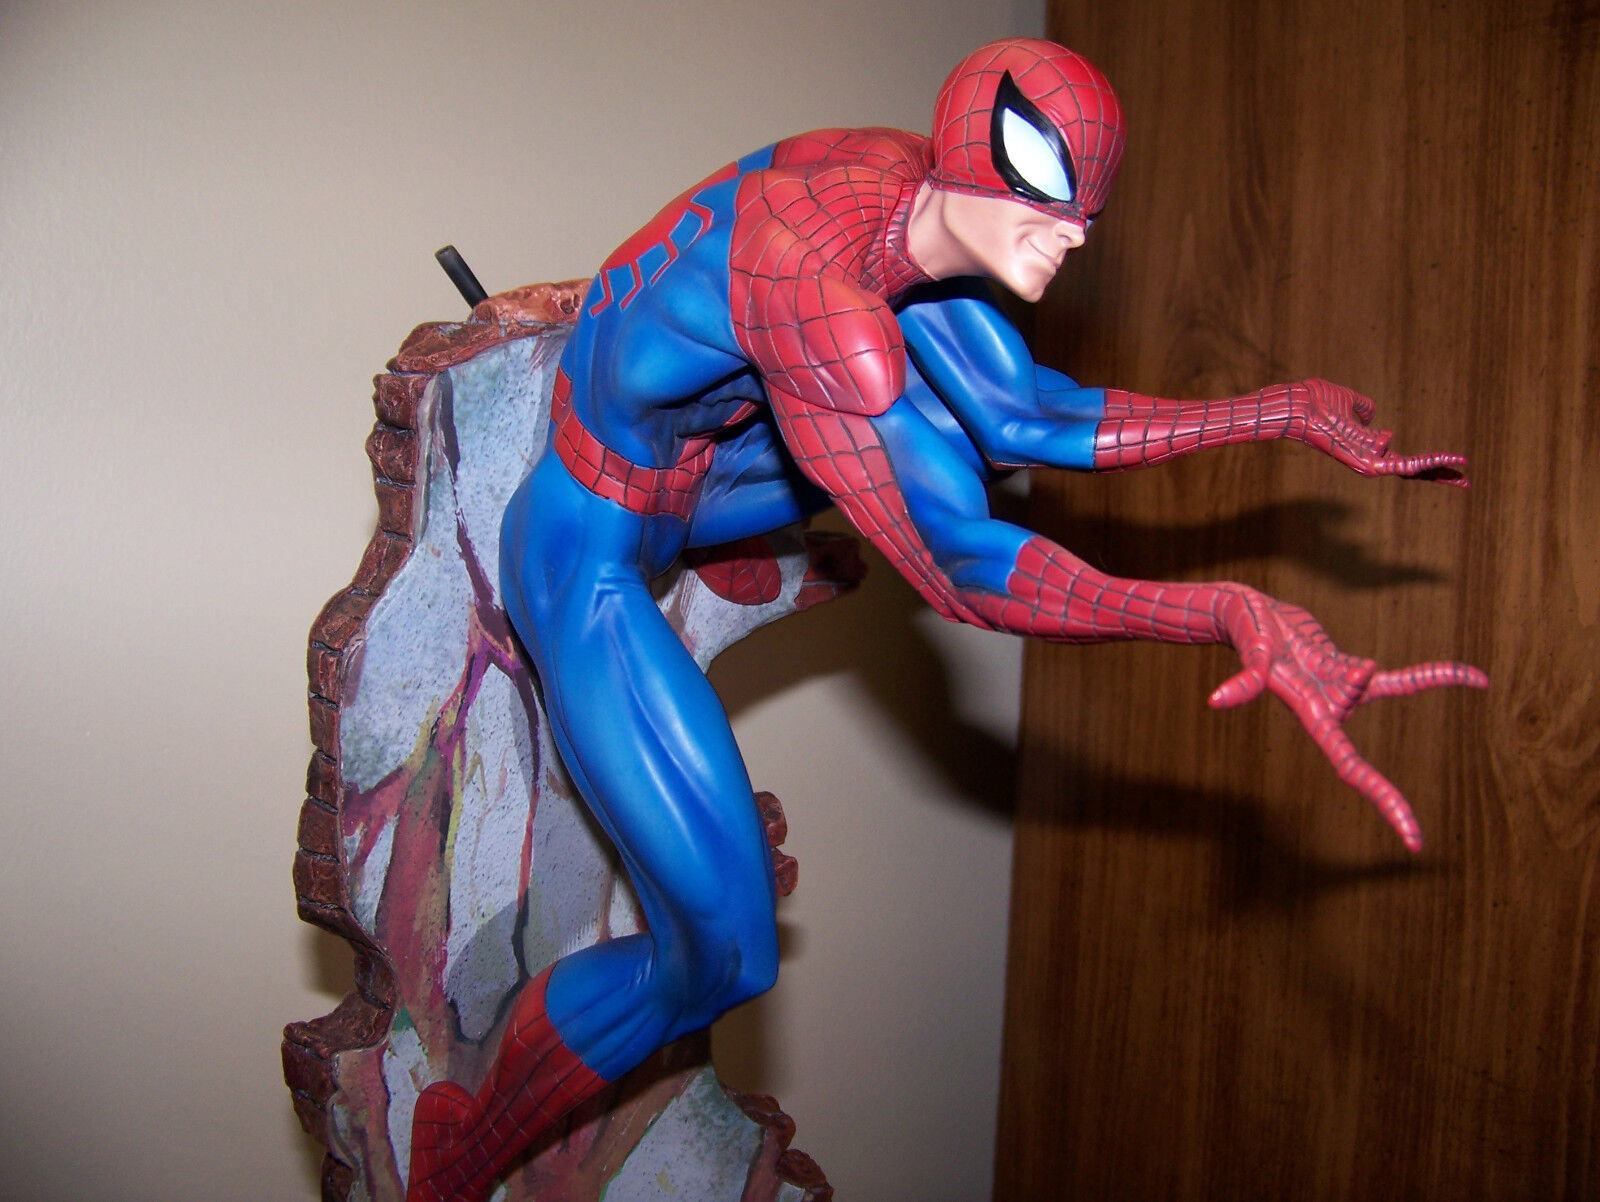 SIDESHOW EXCLUSIVE SPIDER-MAN COMIQUETTE STATUE w/ 2 SIGNED TOM HOLLAND PHOTOs